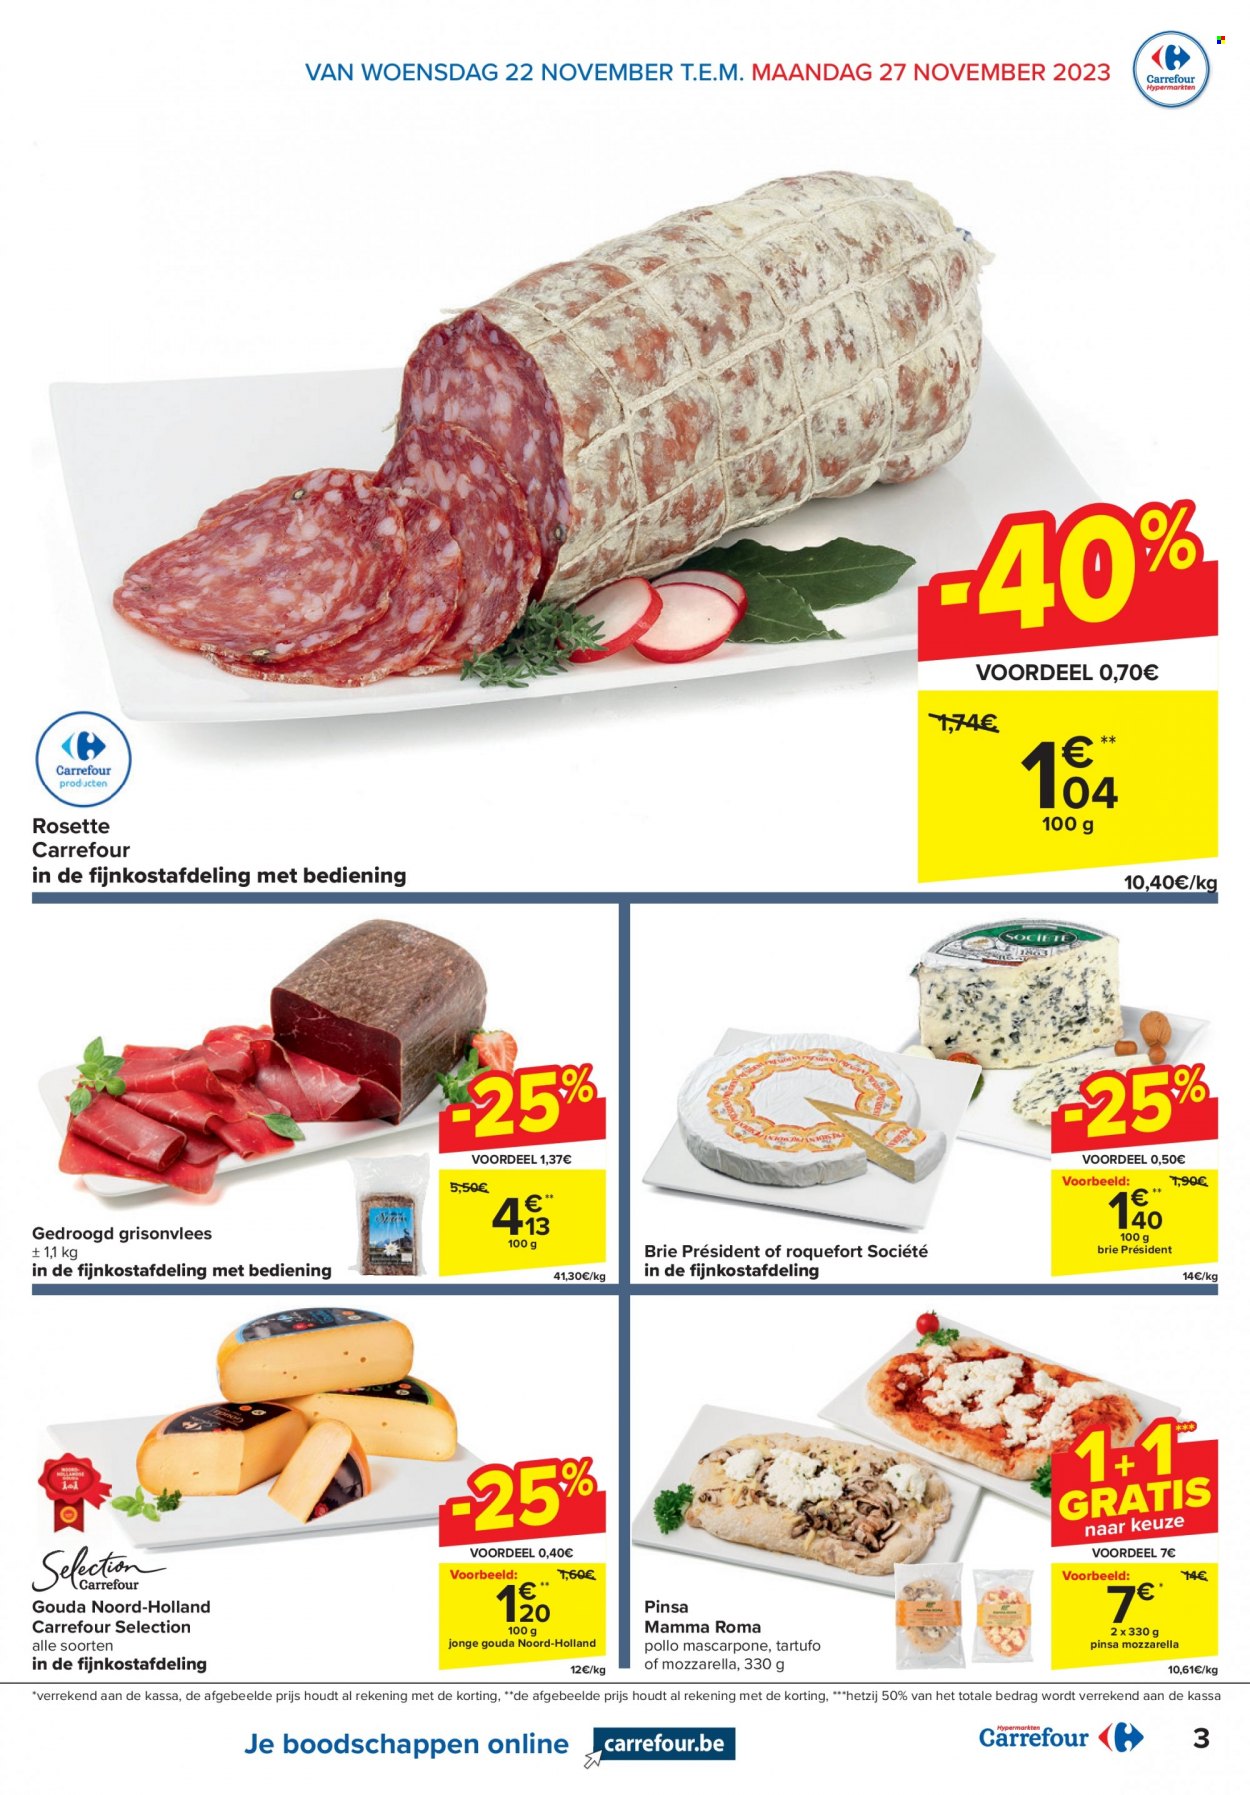 Catalogue Carrefour hypermarkt - 22.11.2023 - 4.12.2023. Page 3.